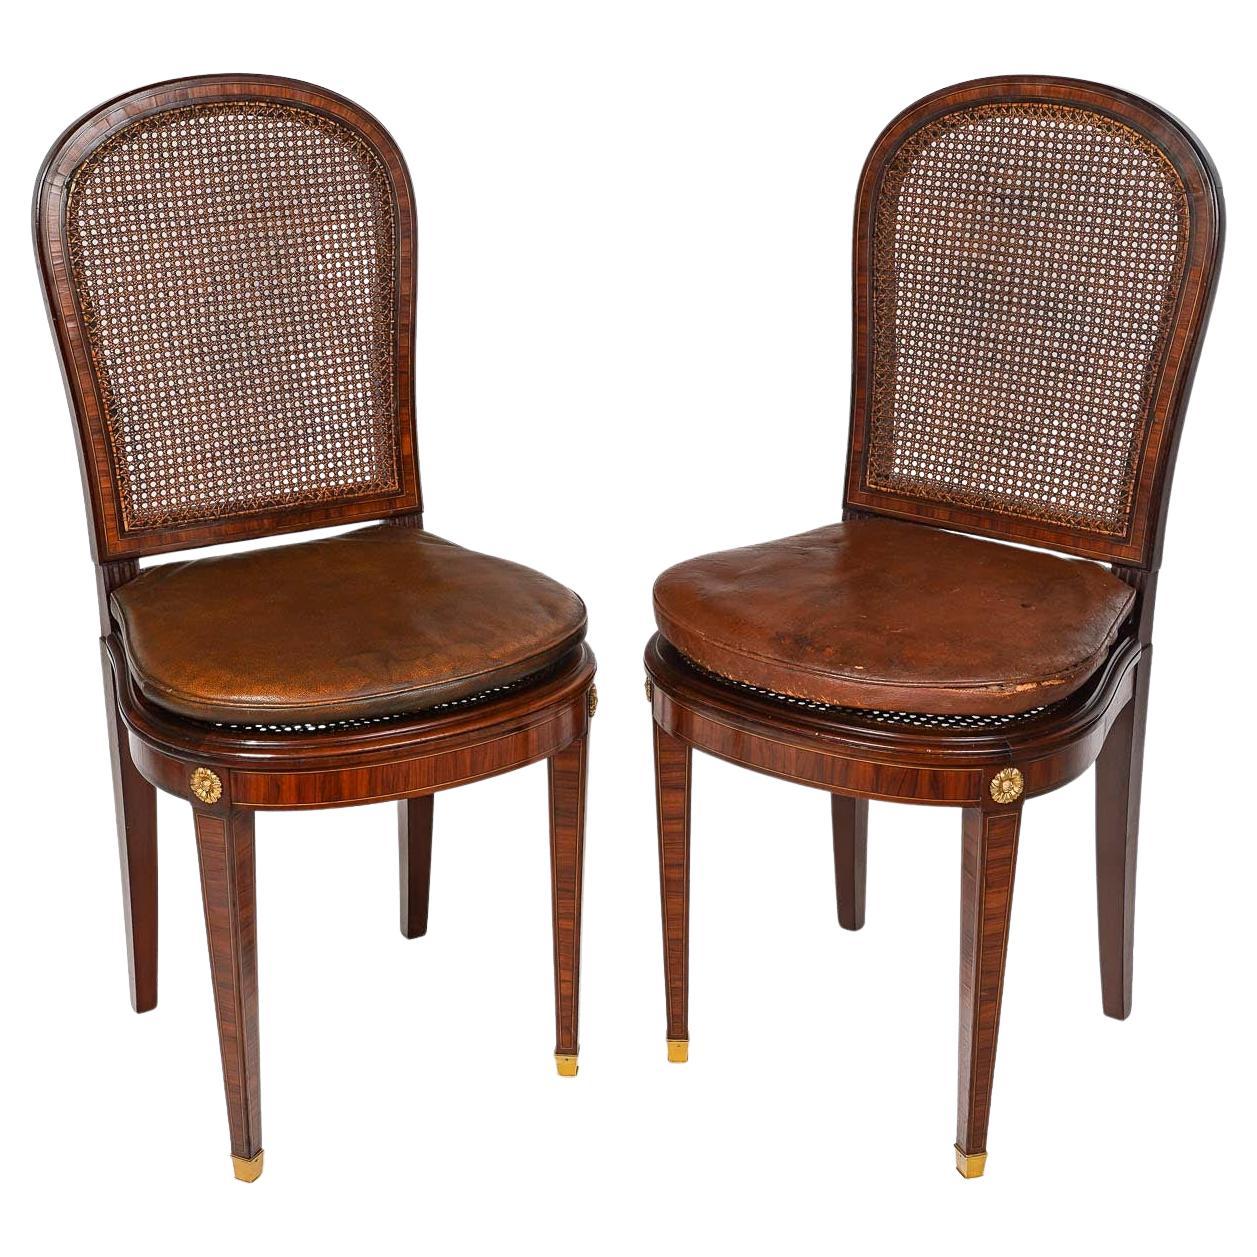 Pair of 19th Century Chairs in the Louis XVI Style. For Sale